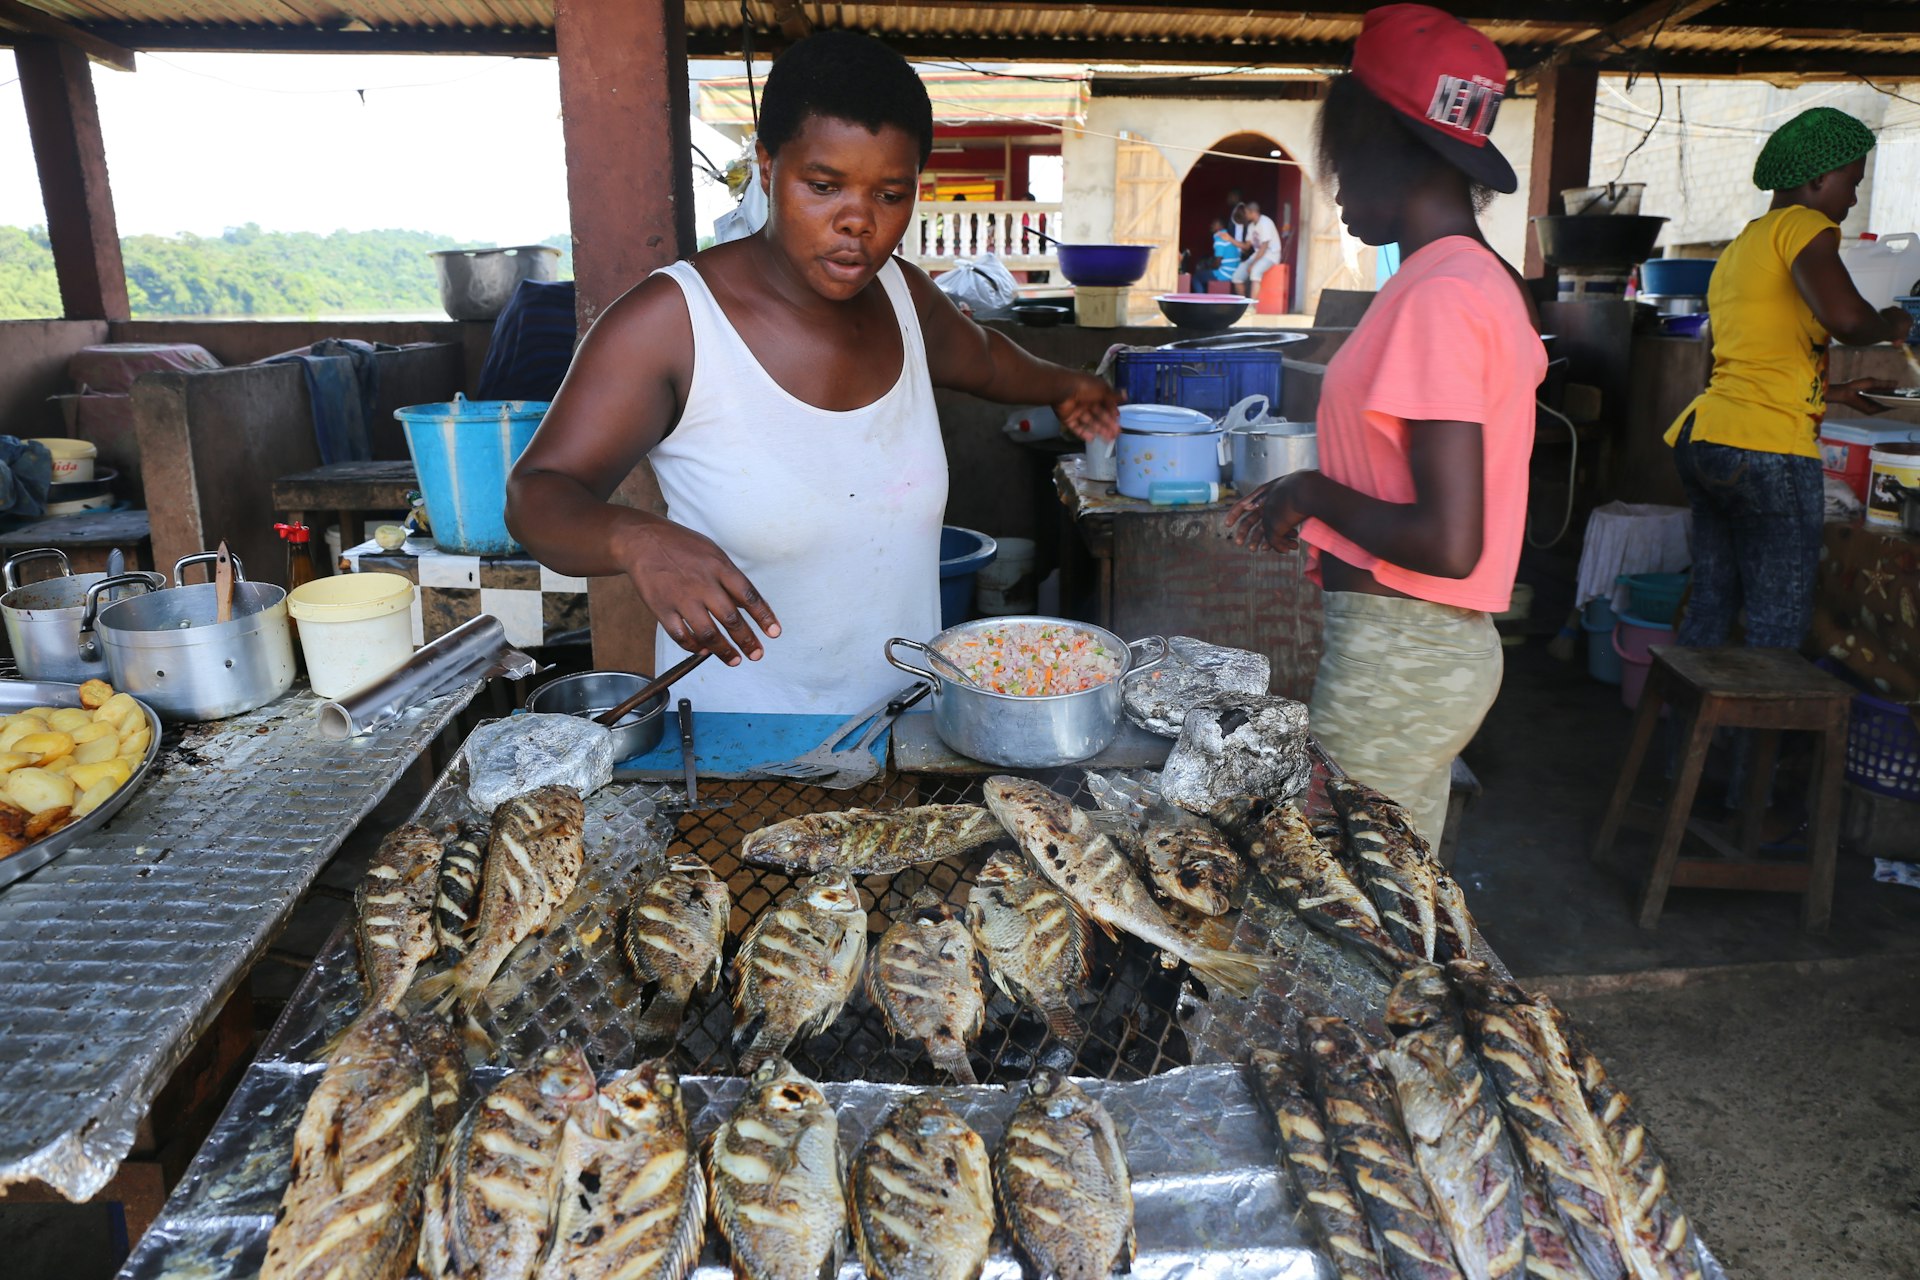 A woman grilling fish at a traditional restaurant, Ndjolé, Gabon, Africa